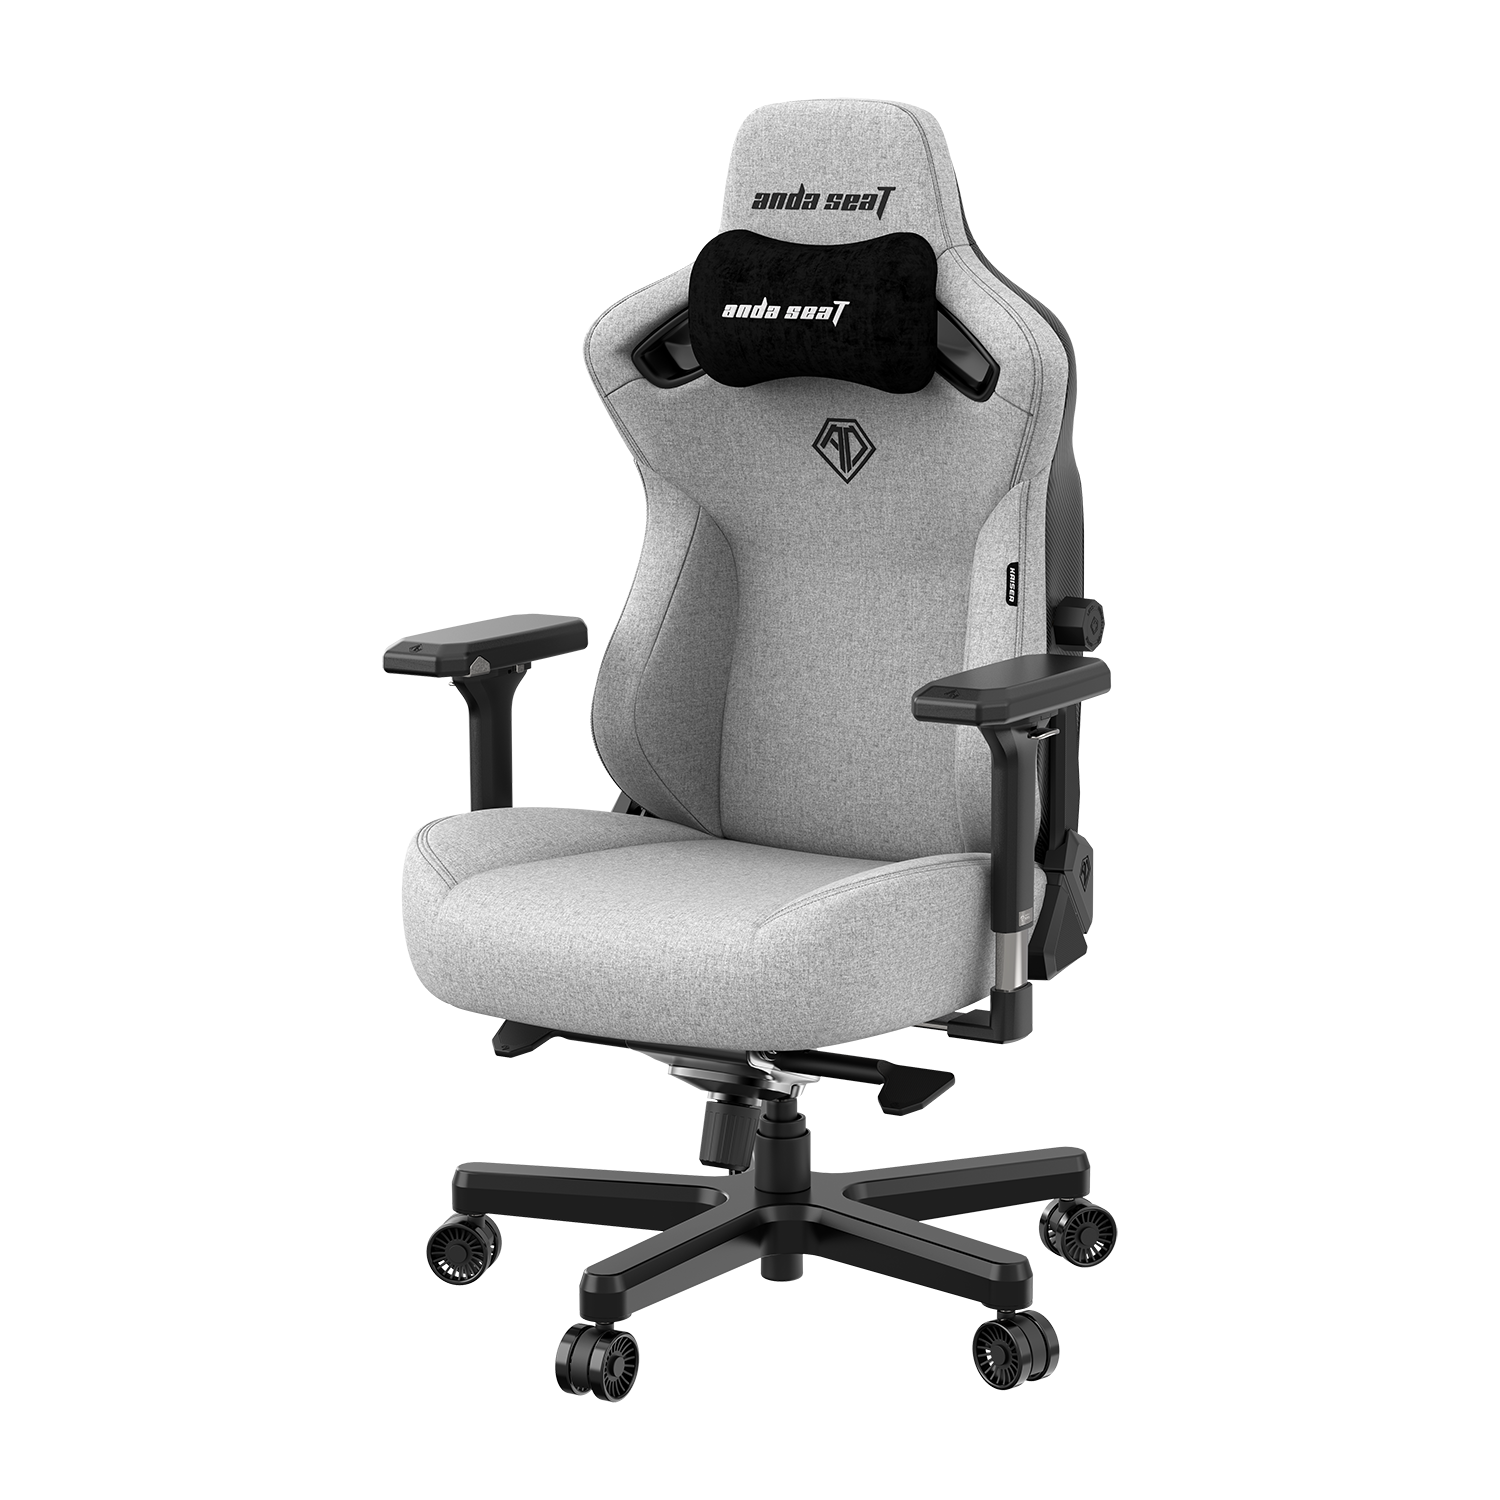 ANDASEAT KAISER 3 L SIZE EVERSOFT LINEN FABRIC - ASH GRAY GAMING CHAIR